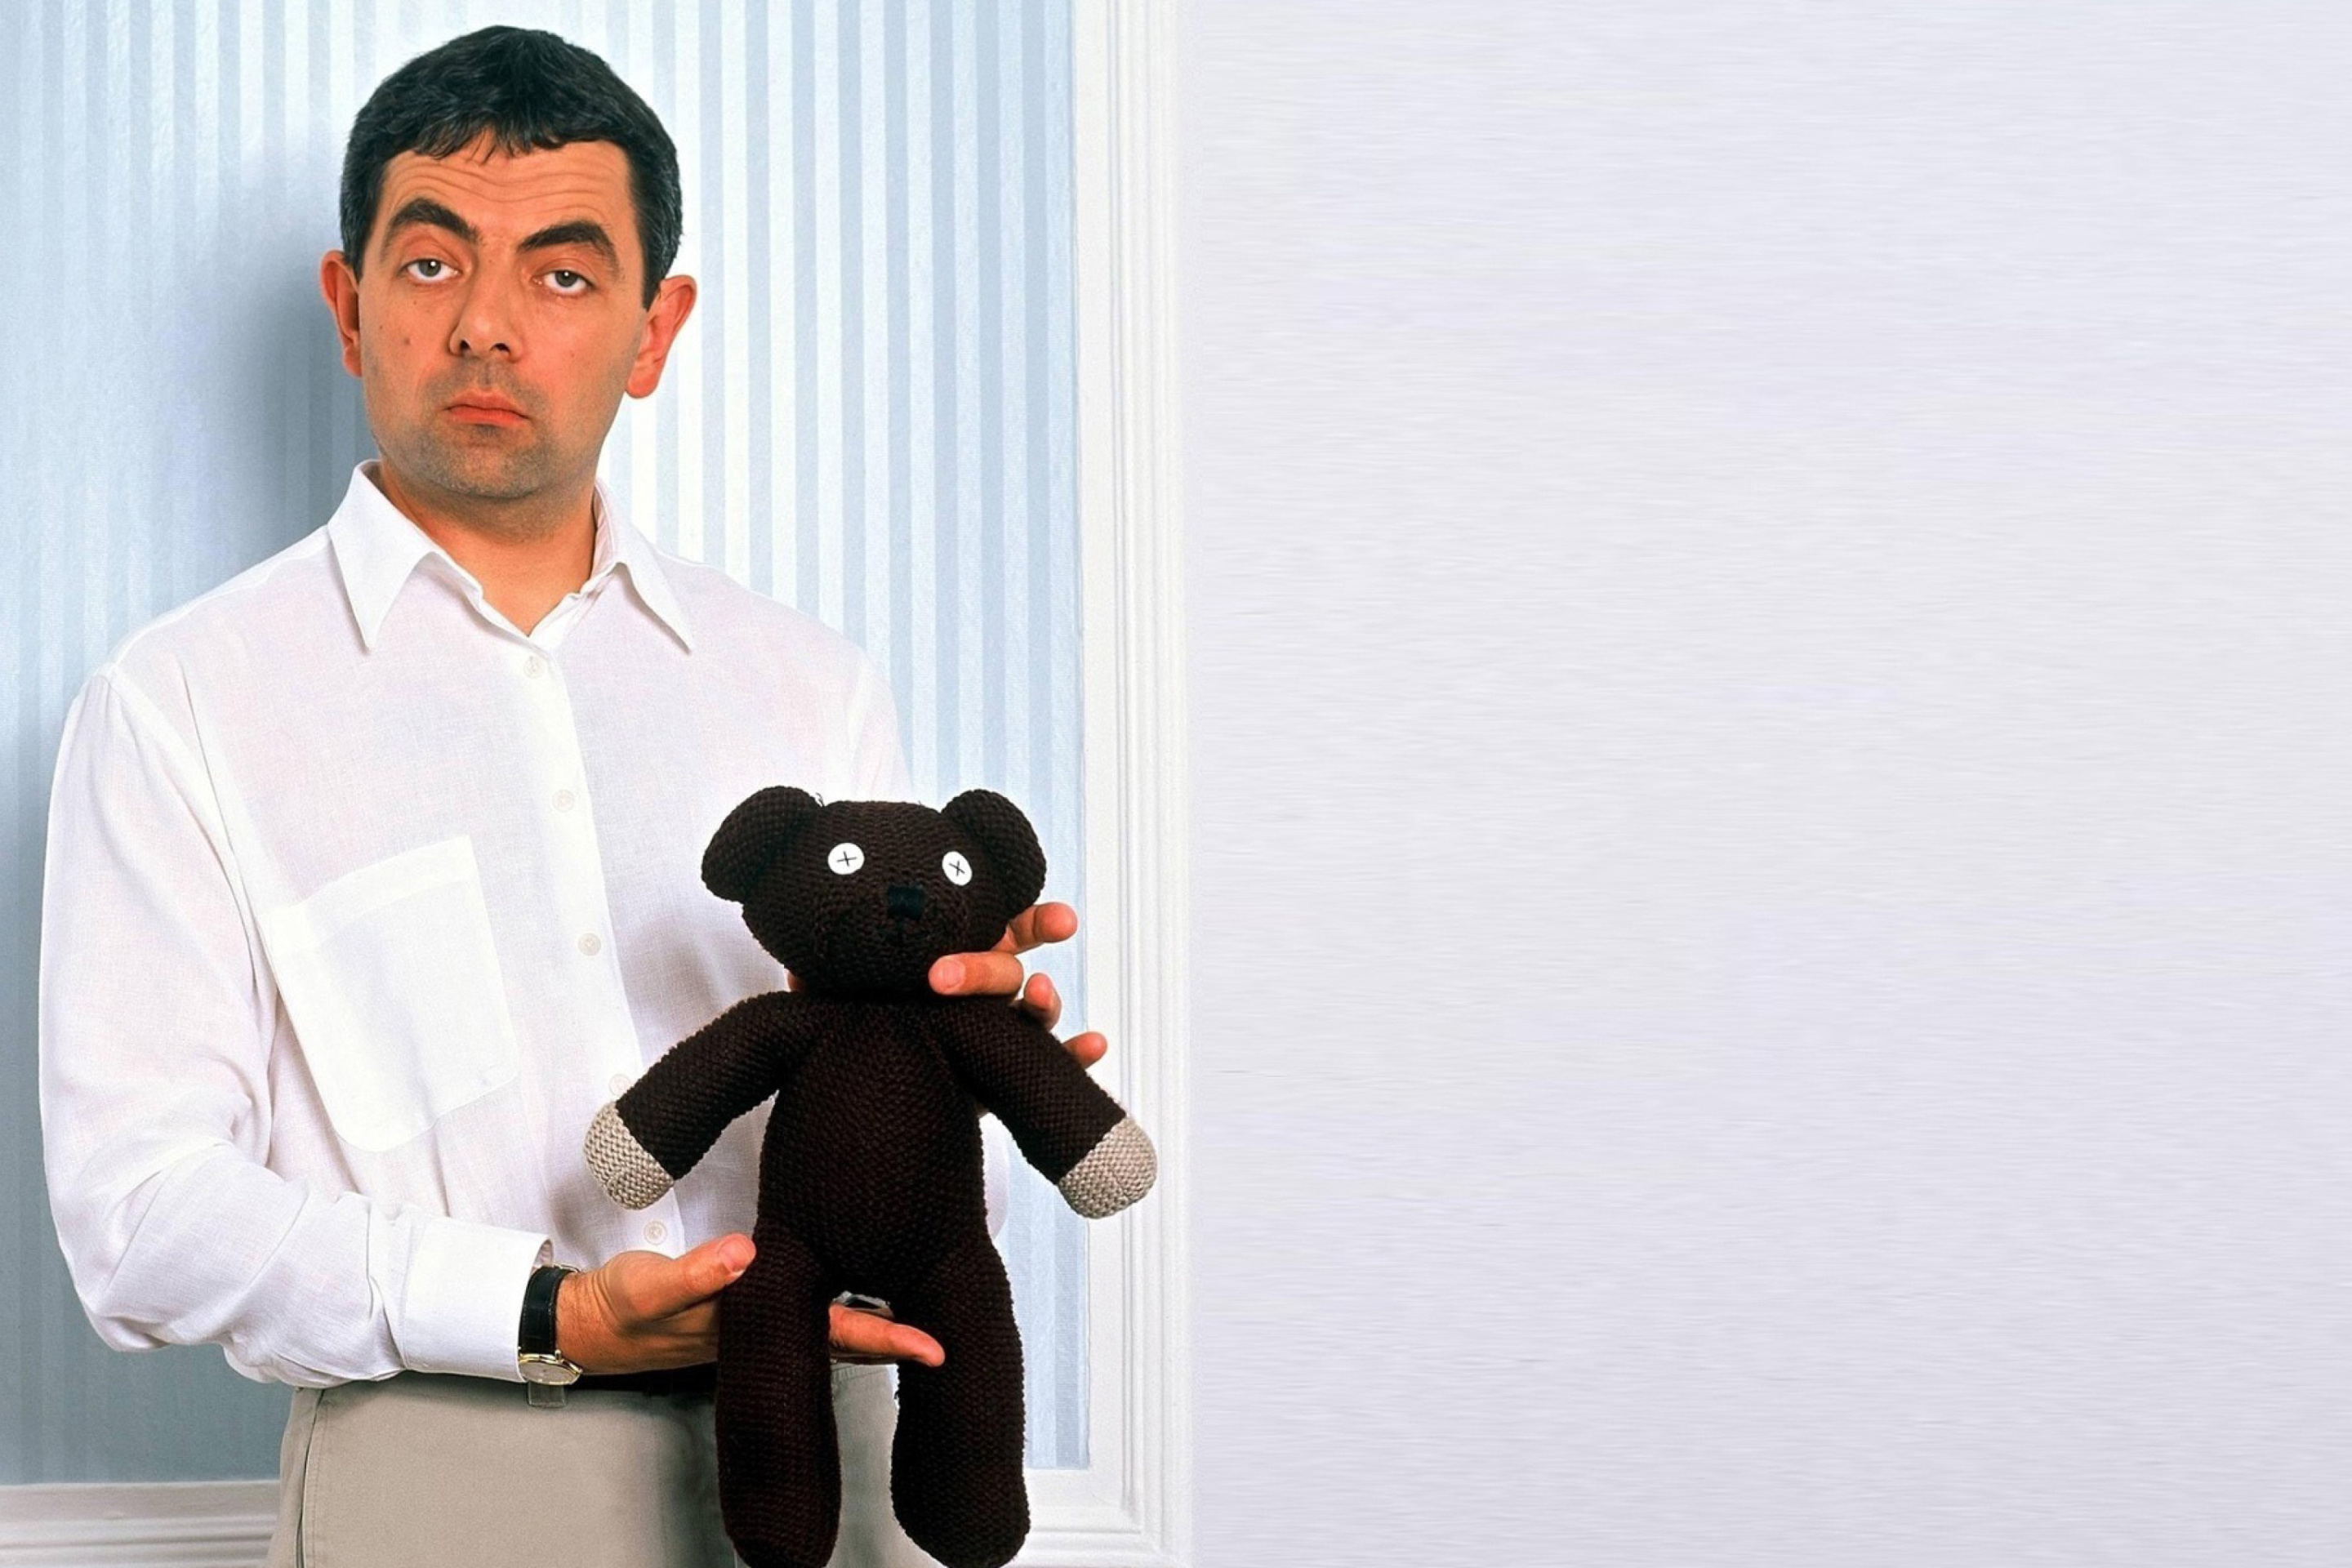 Mr Bean with Knitted Brown Teddy Bear wallpaper 2880x1920